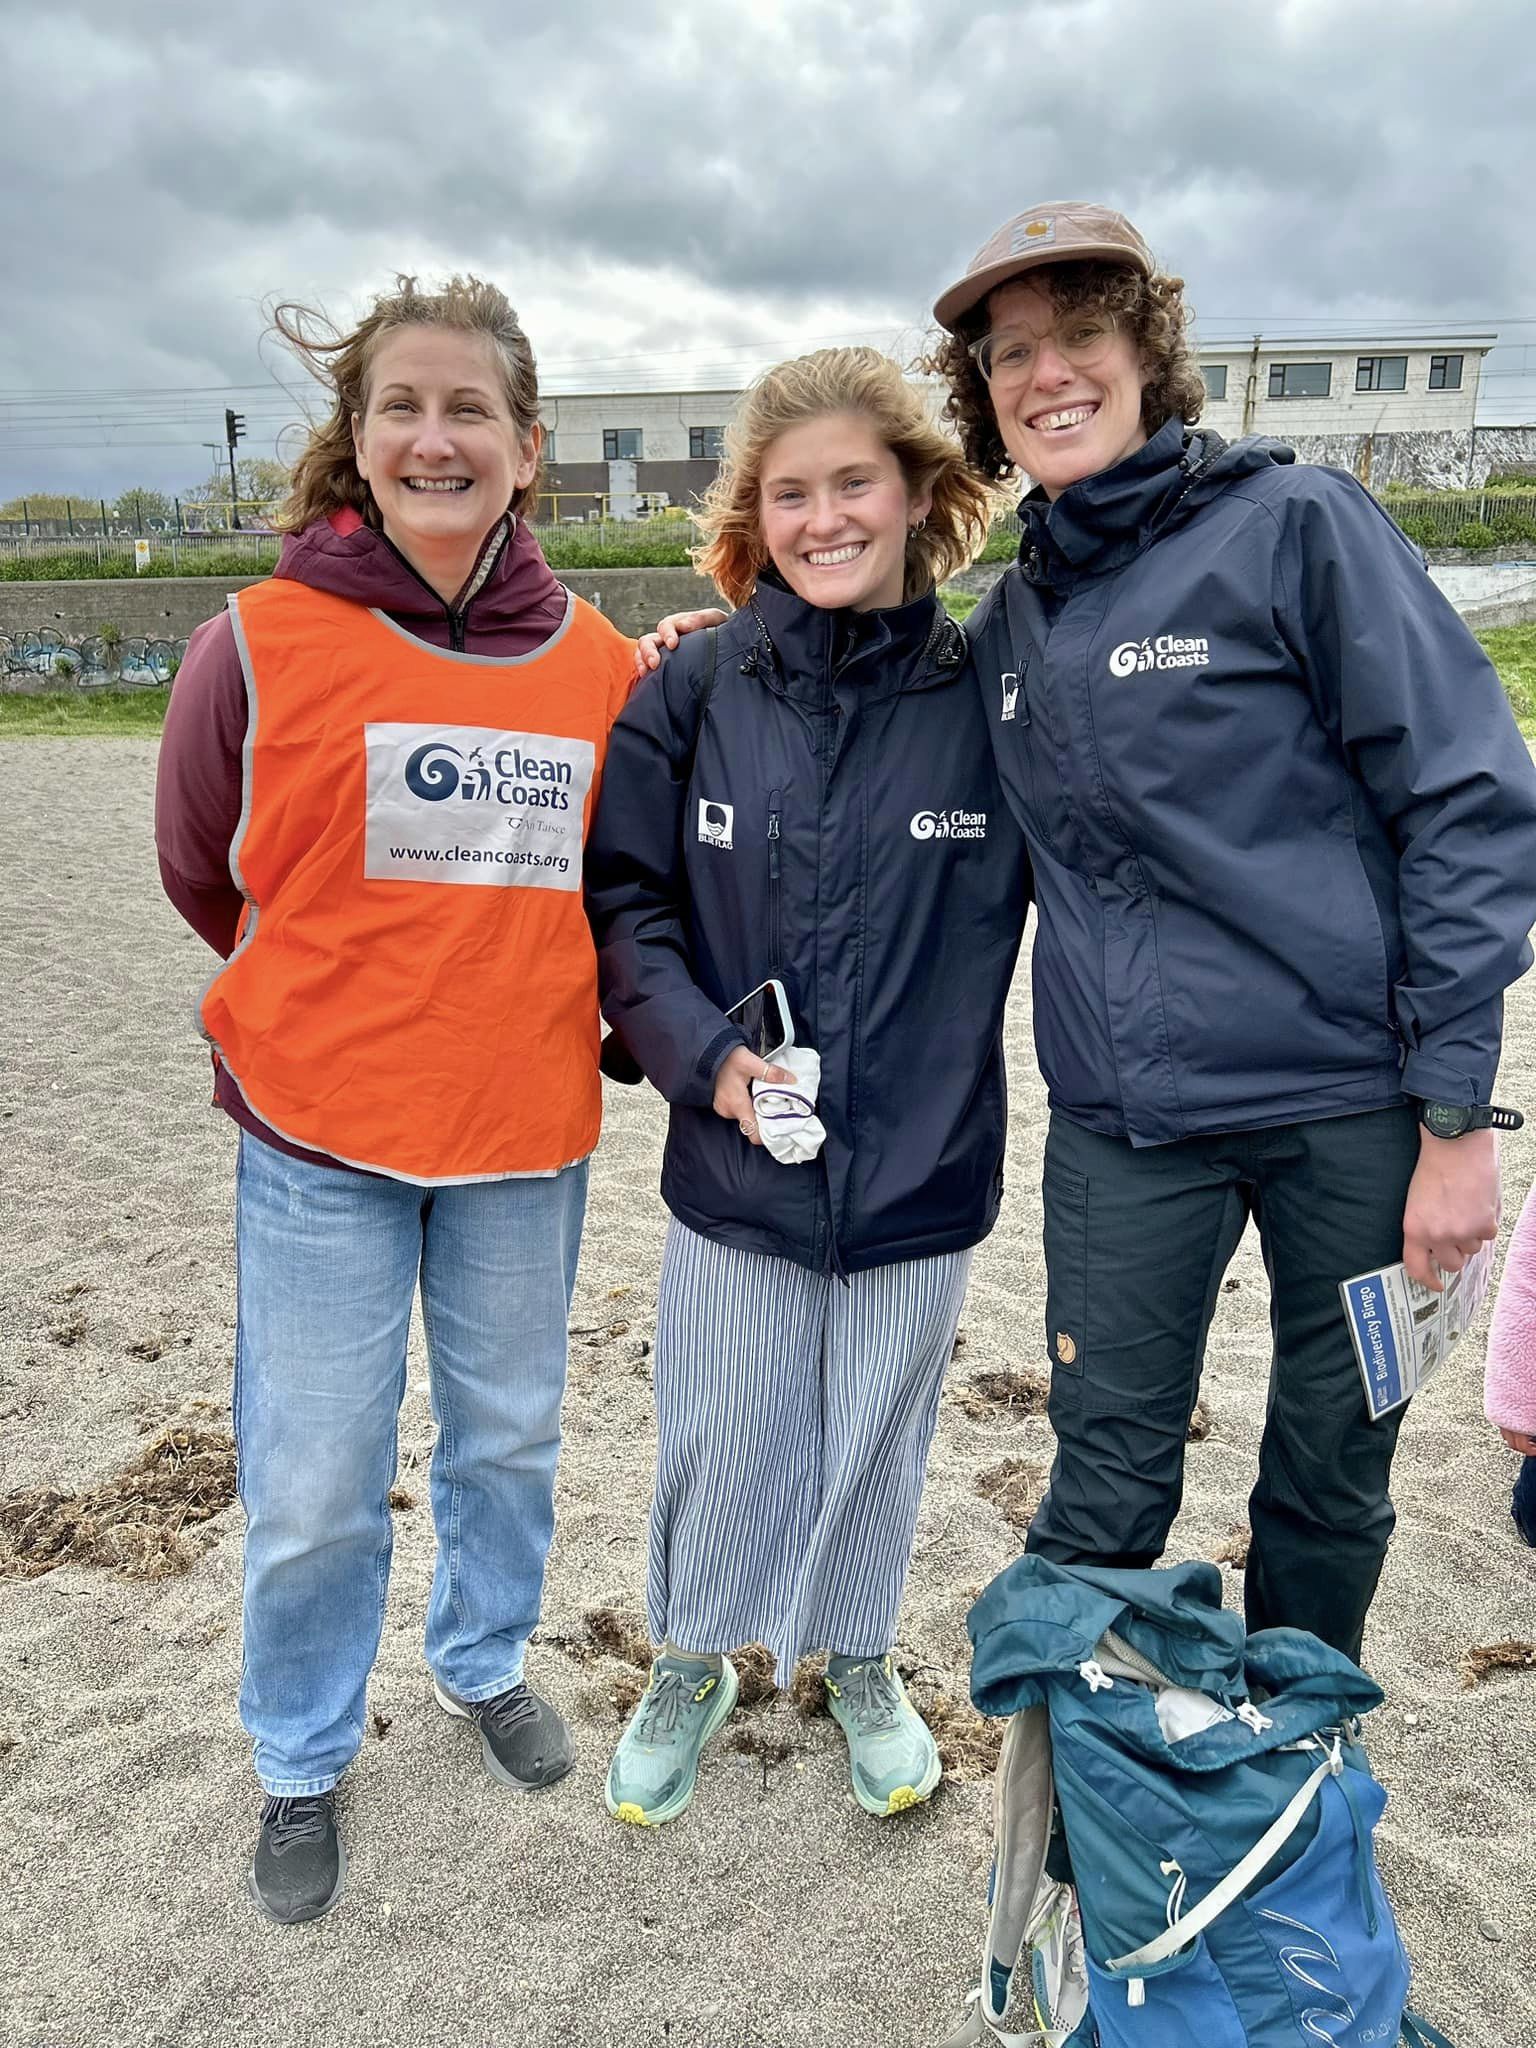 Image shows members of the Clean Coasts team on Greystones South Beach, everyone is smiling after a fun Biodiversity Bingo.